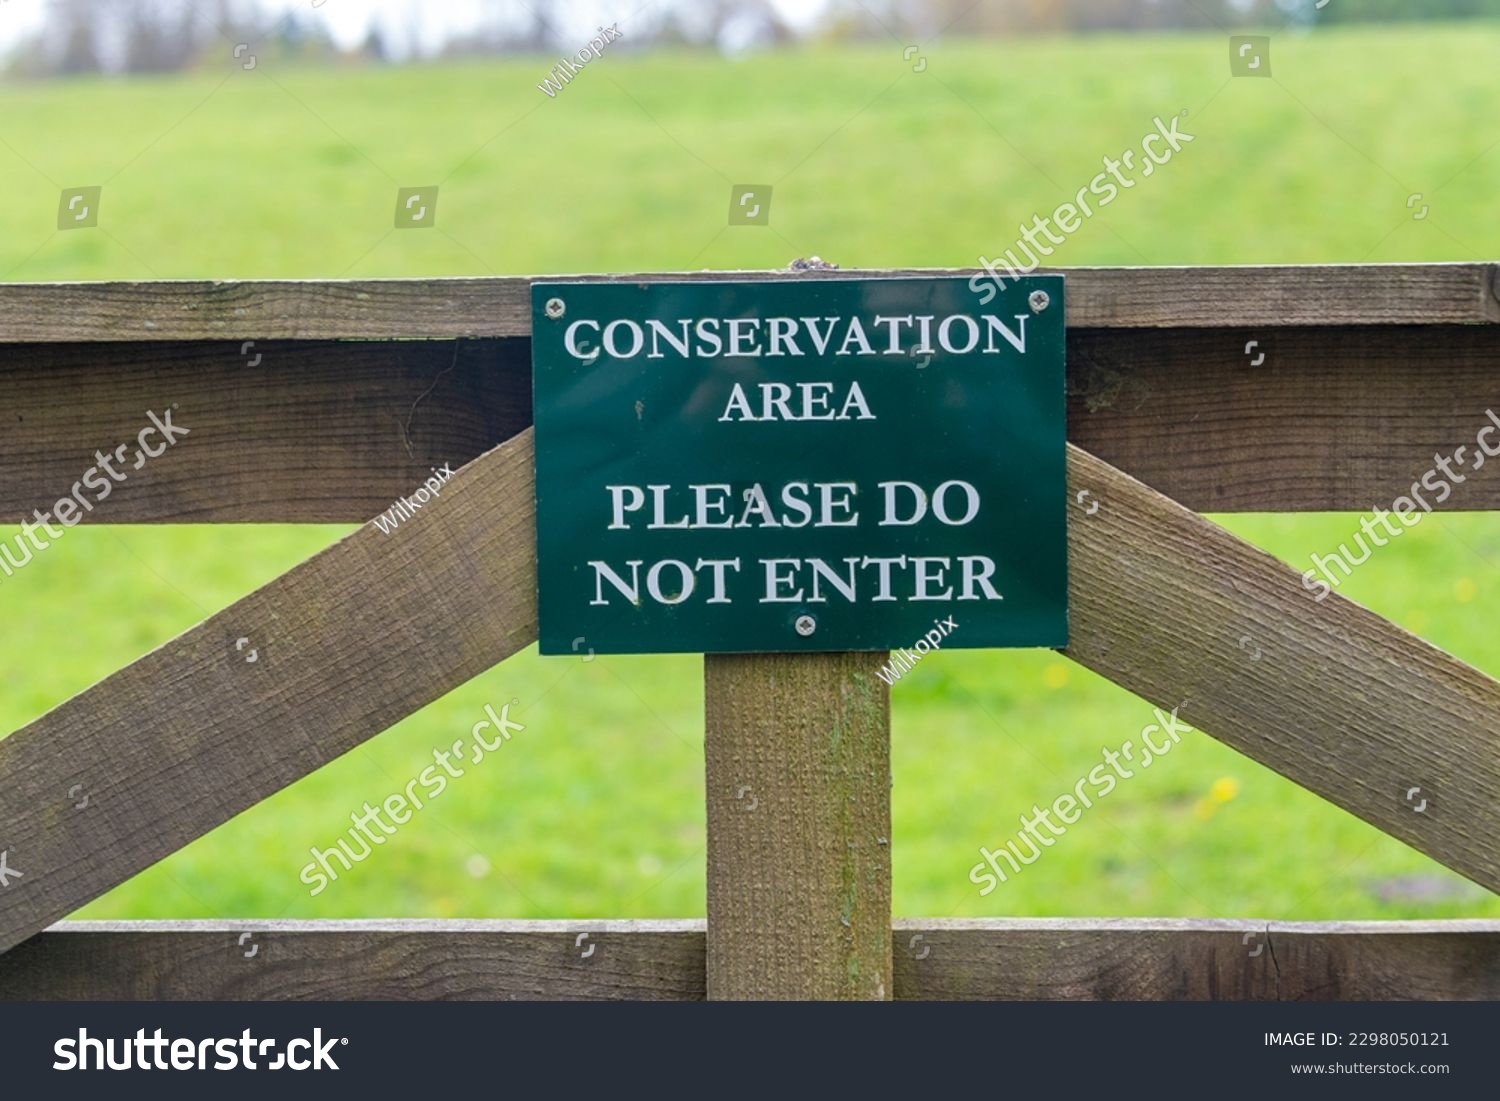 Conservation area, please do not enter sign on a wooden gate. #2298050121